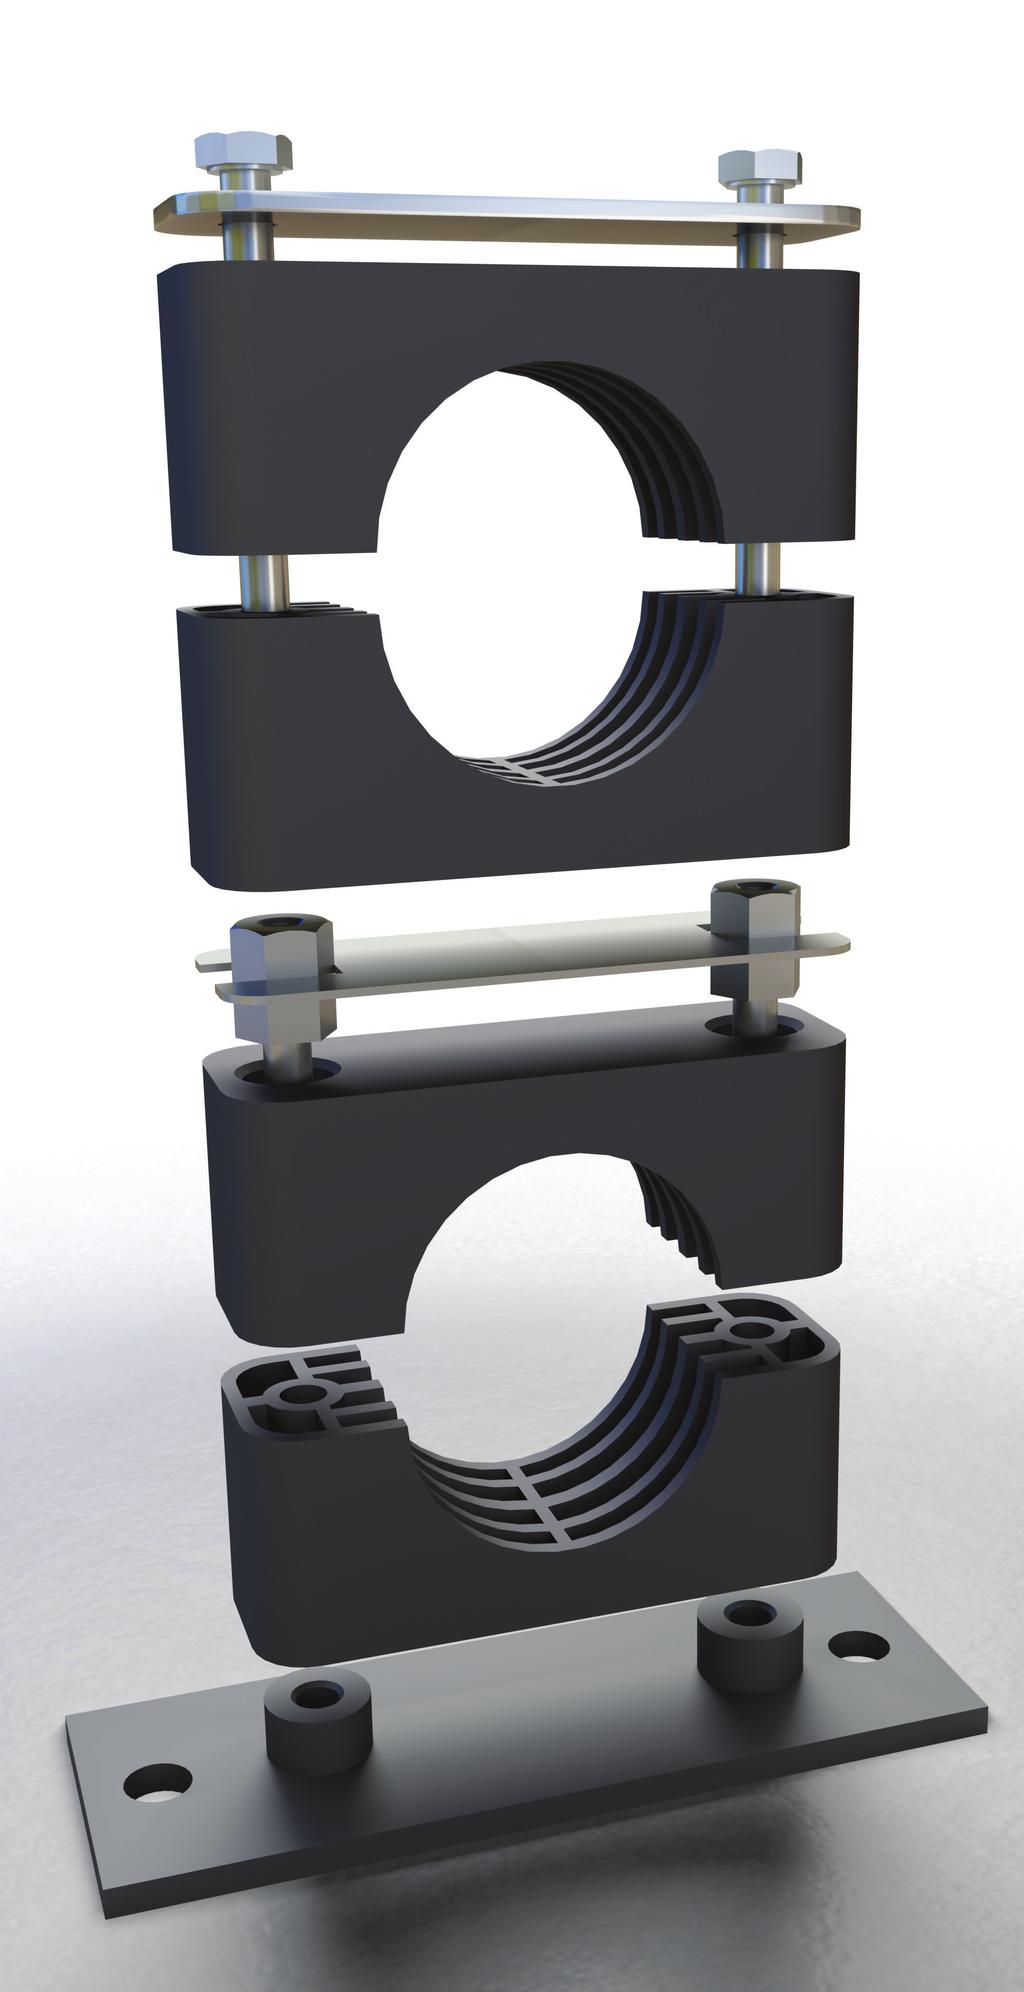 Clamps Features & Benefits COVER PLATE FEATURE OF CLAMP imple to operate Easy to install Can accommodate various temperature ranges Make for quick, easy pipe installation and layout Very high impact